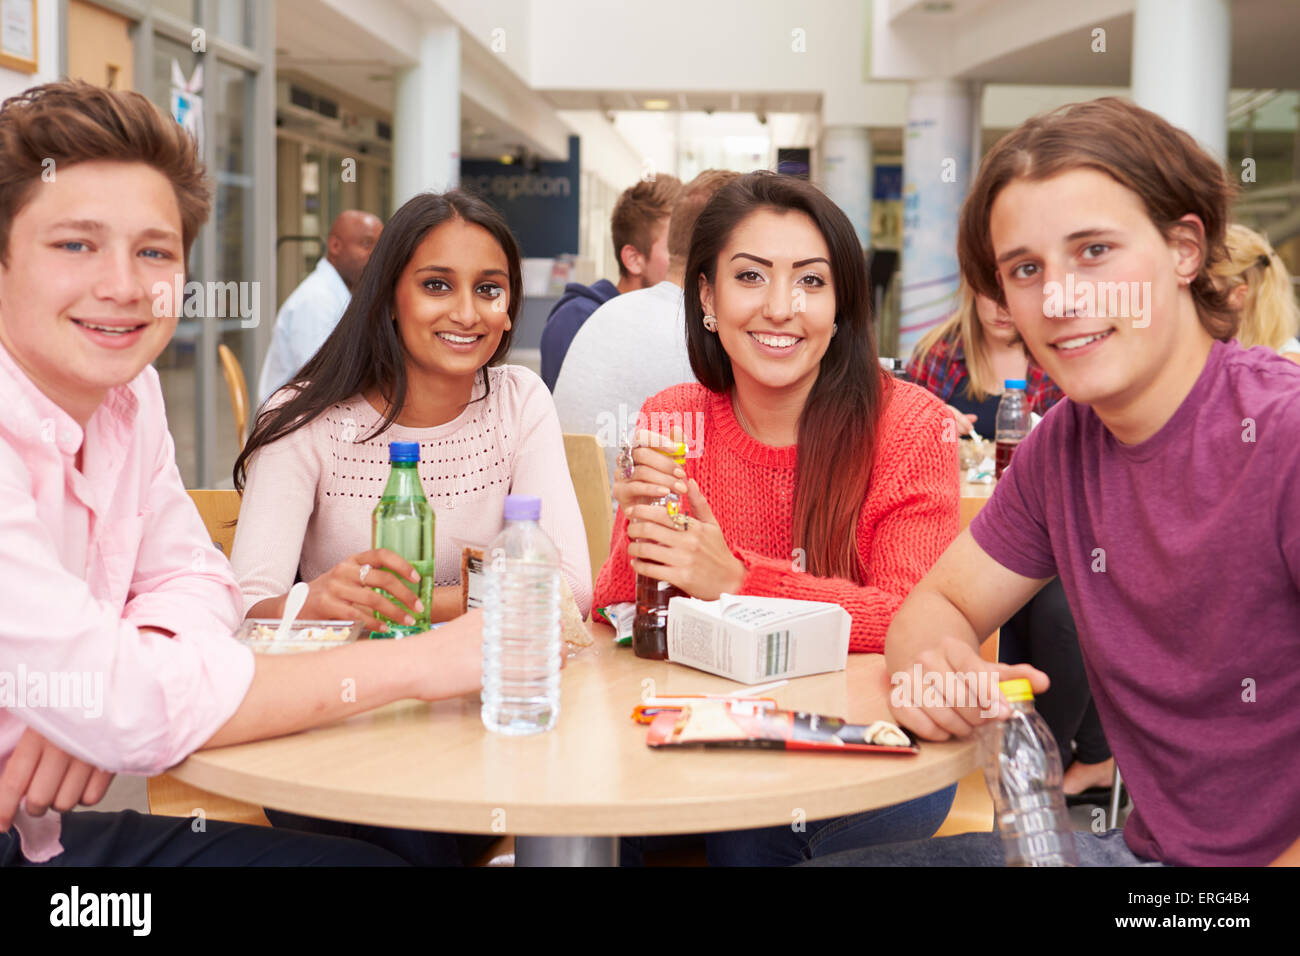 Group Of College Students Eating Lunch Together Stock Photo